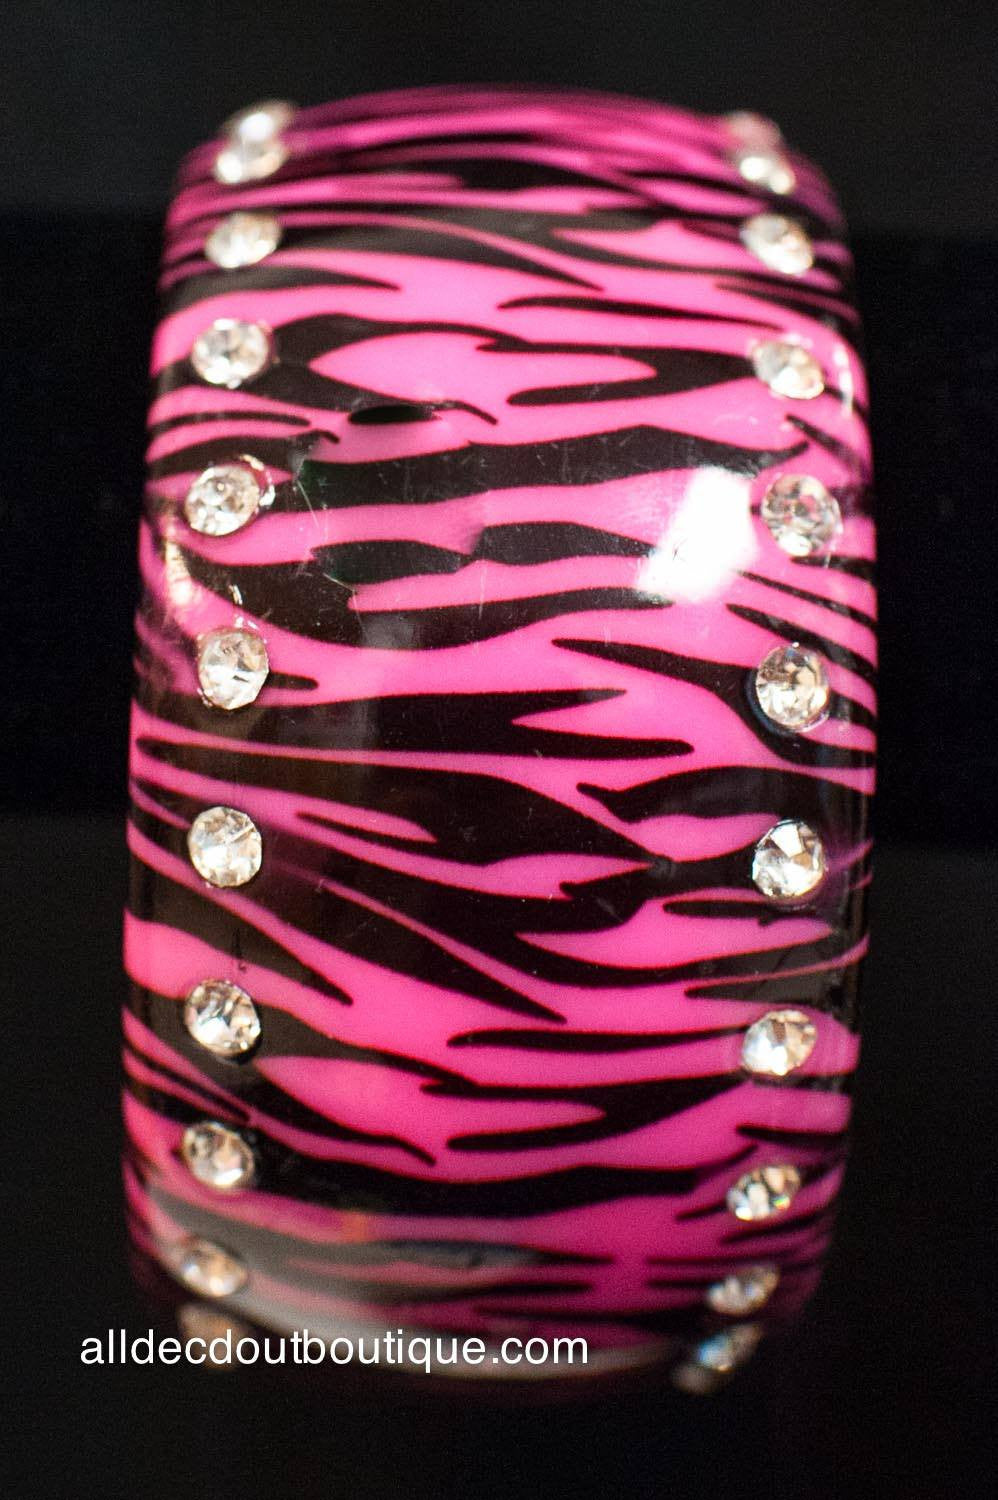 ADO | Black and Pink Zebra Bangle Bracelet with Jewels - All Decd Out